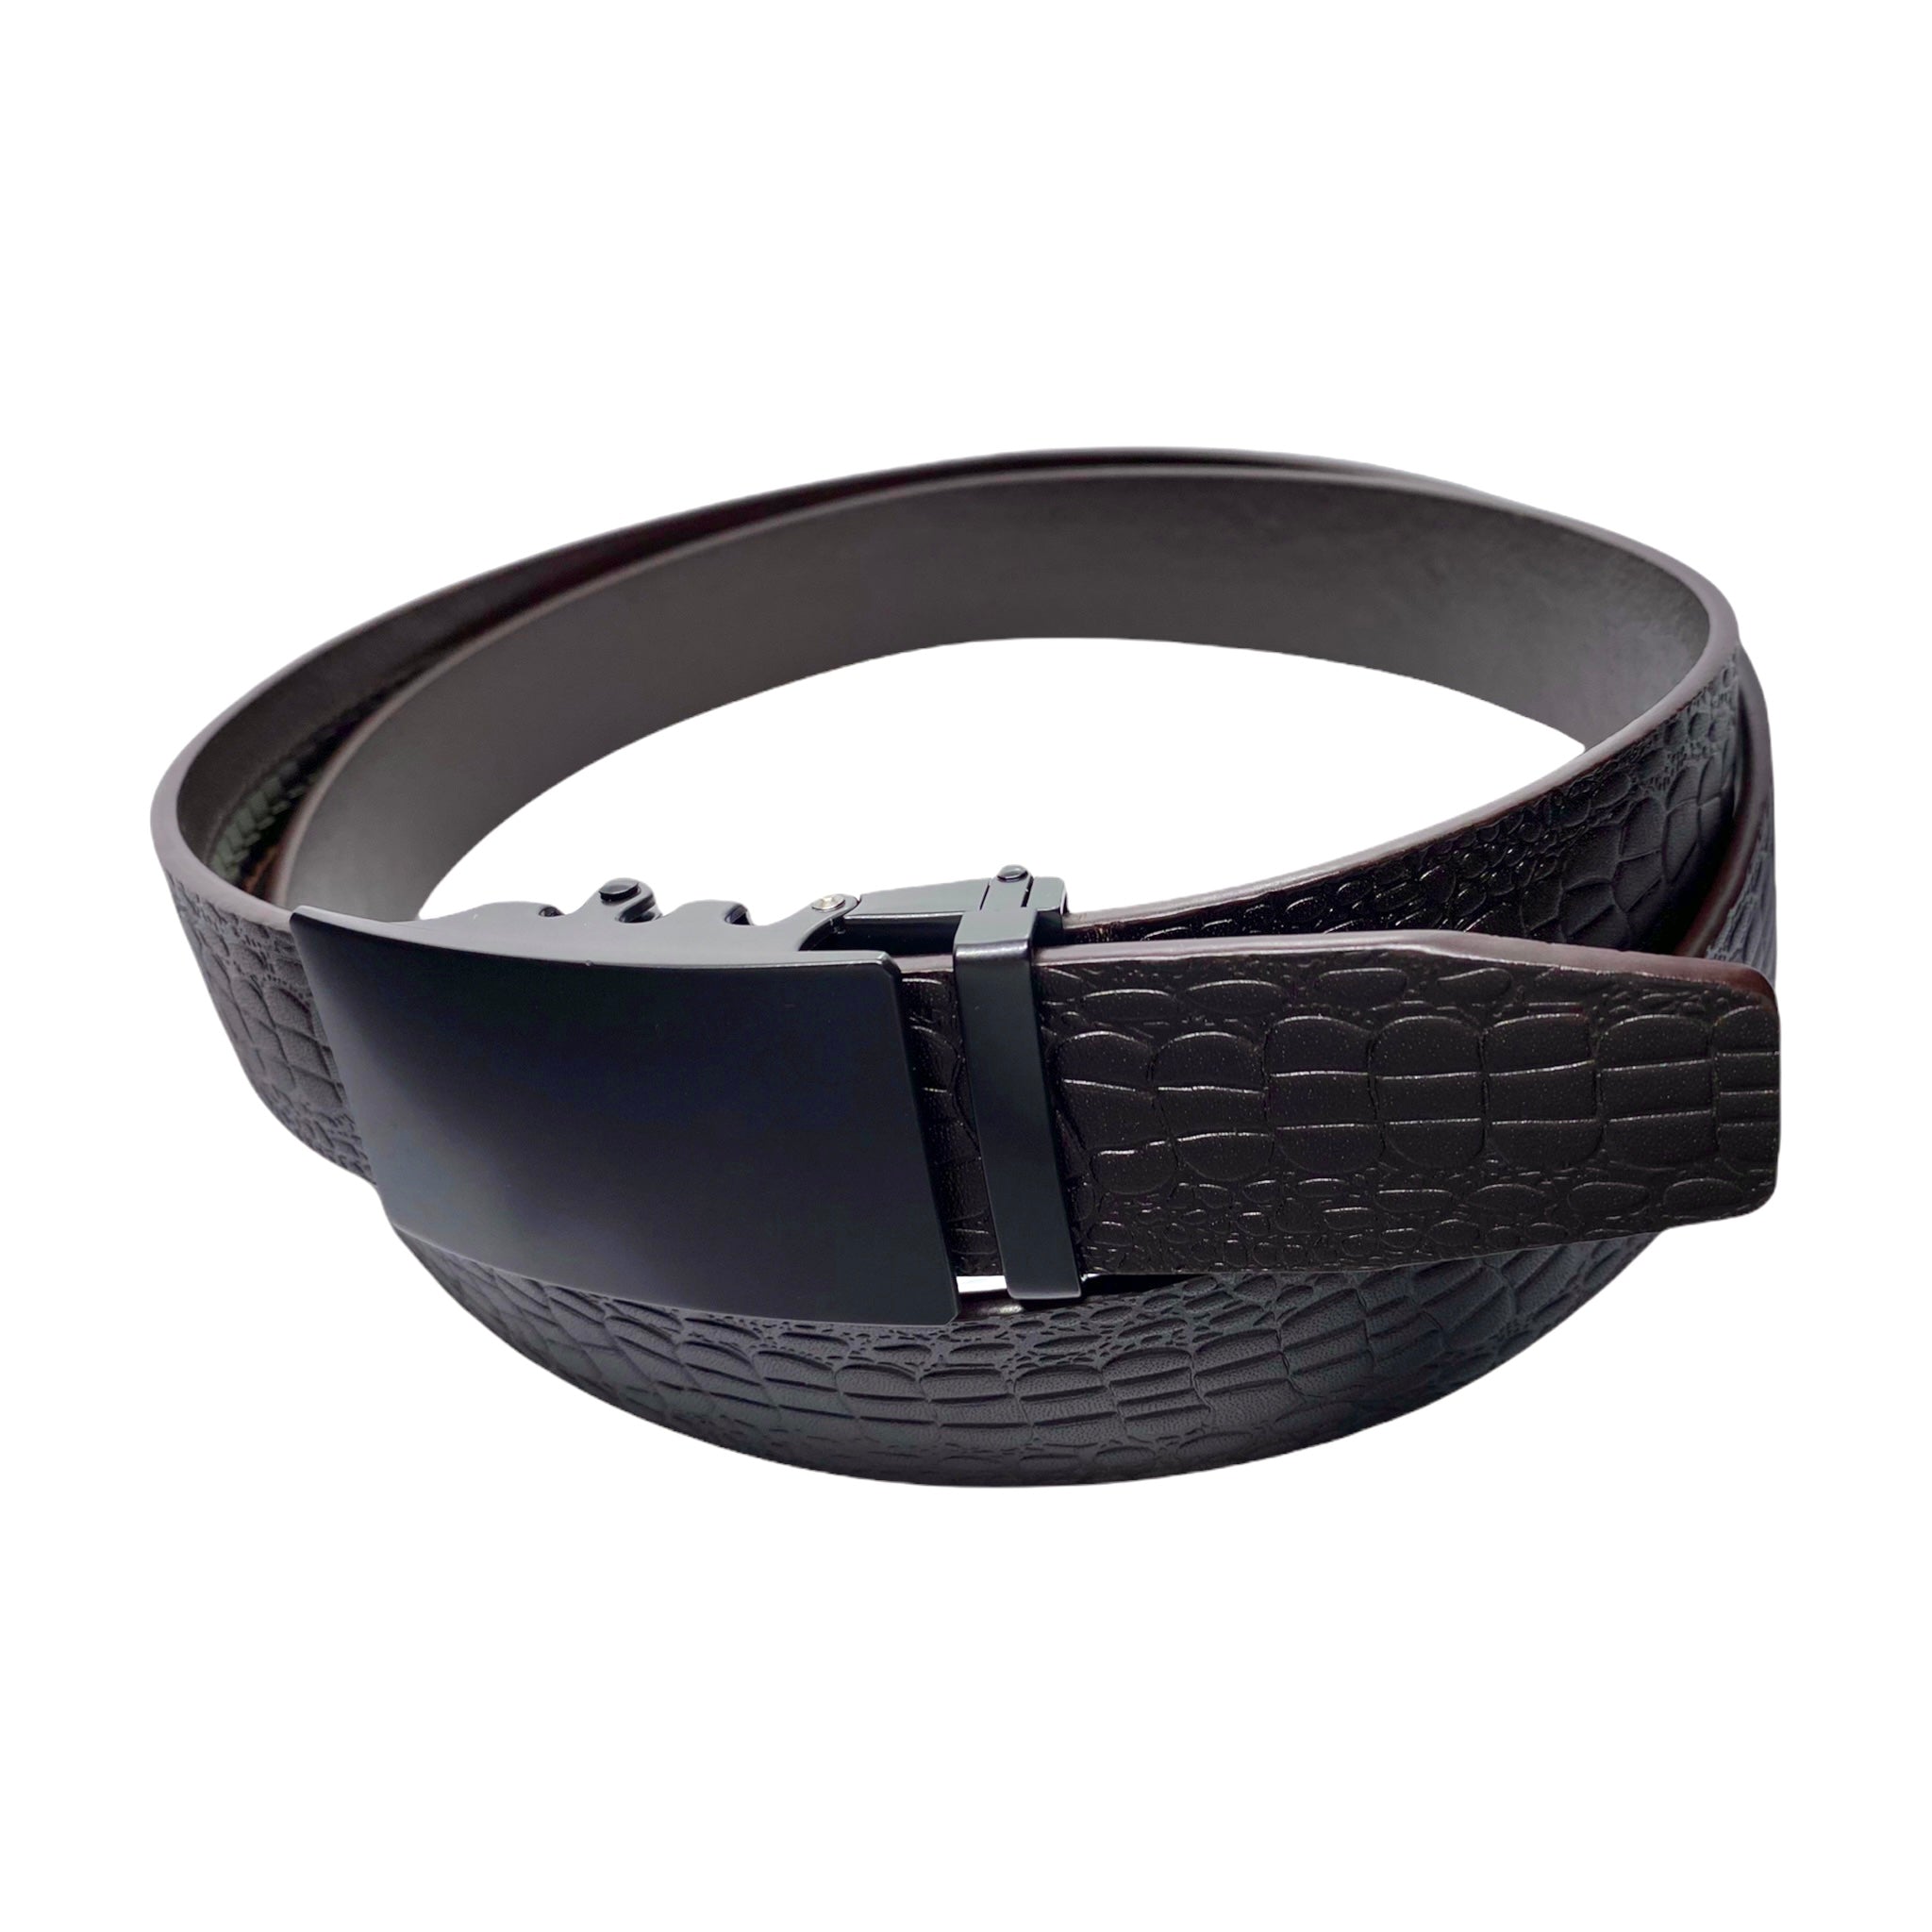 1.38" Genuine Leather Dark Brown Textured Strap And 1.38" Automatic Belt Buckle Black 24710822887575